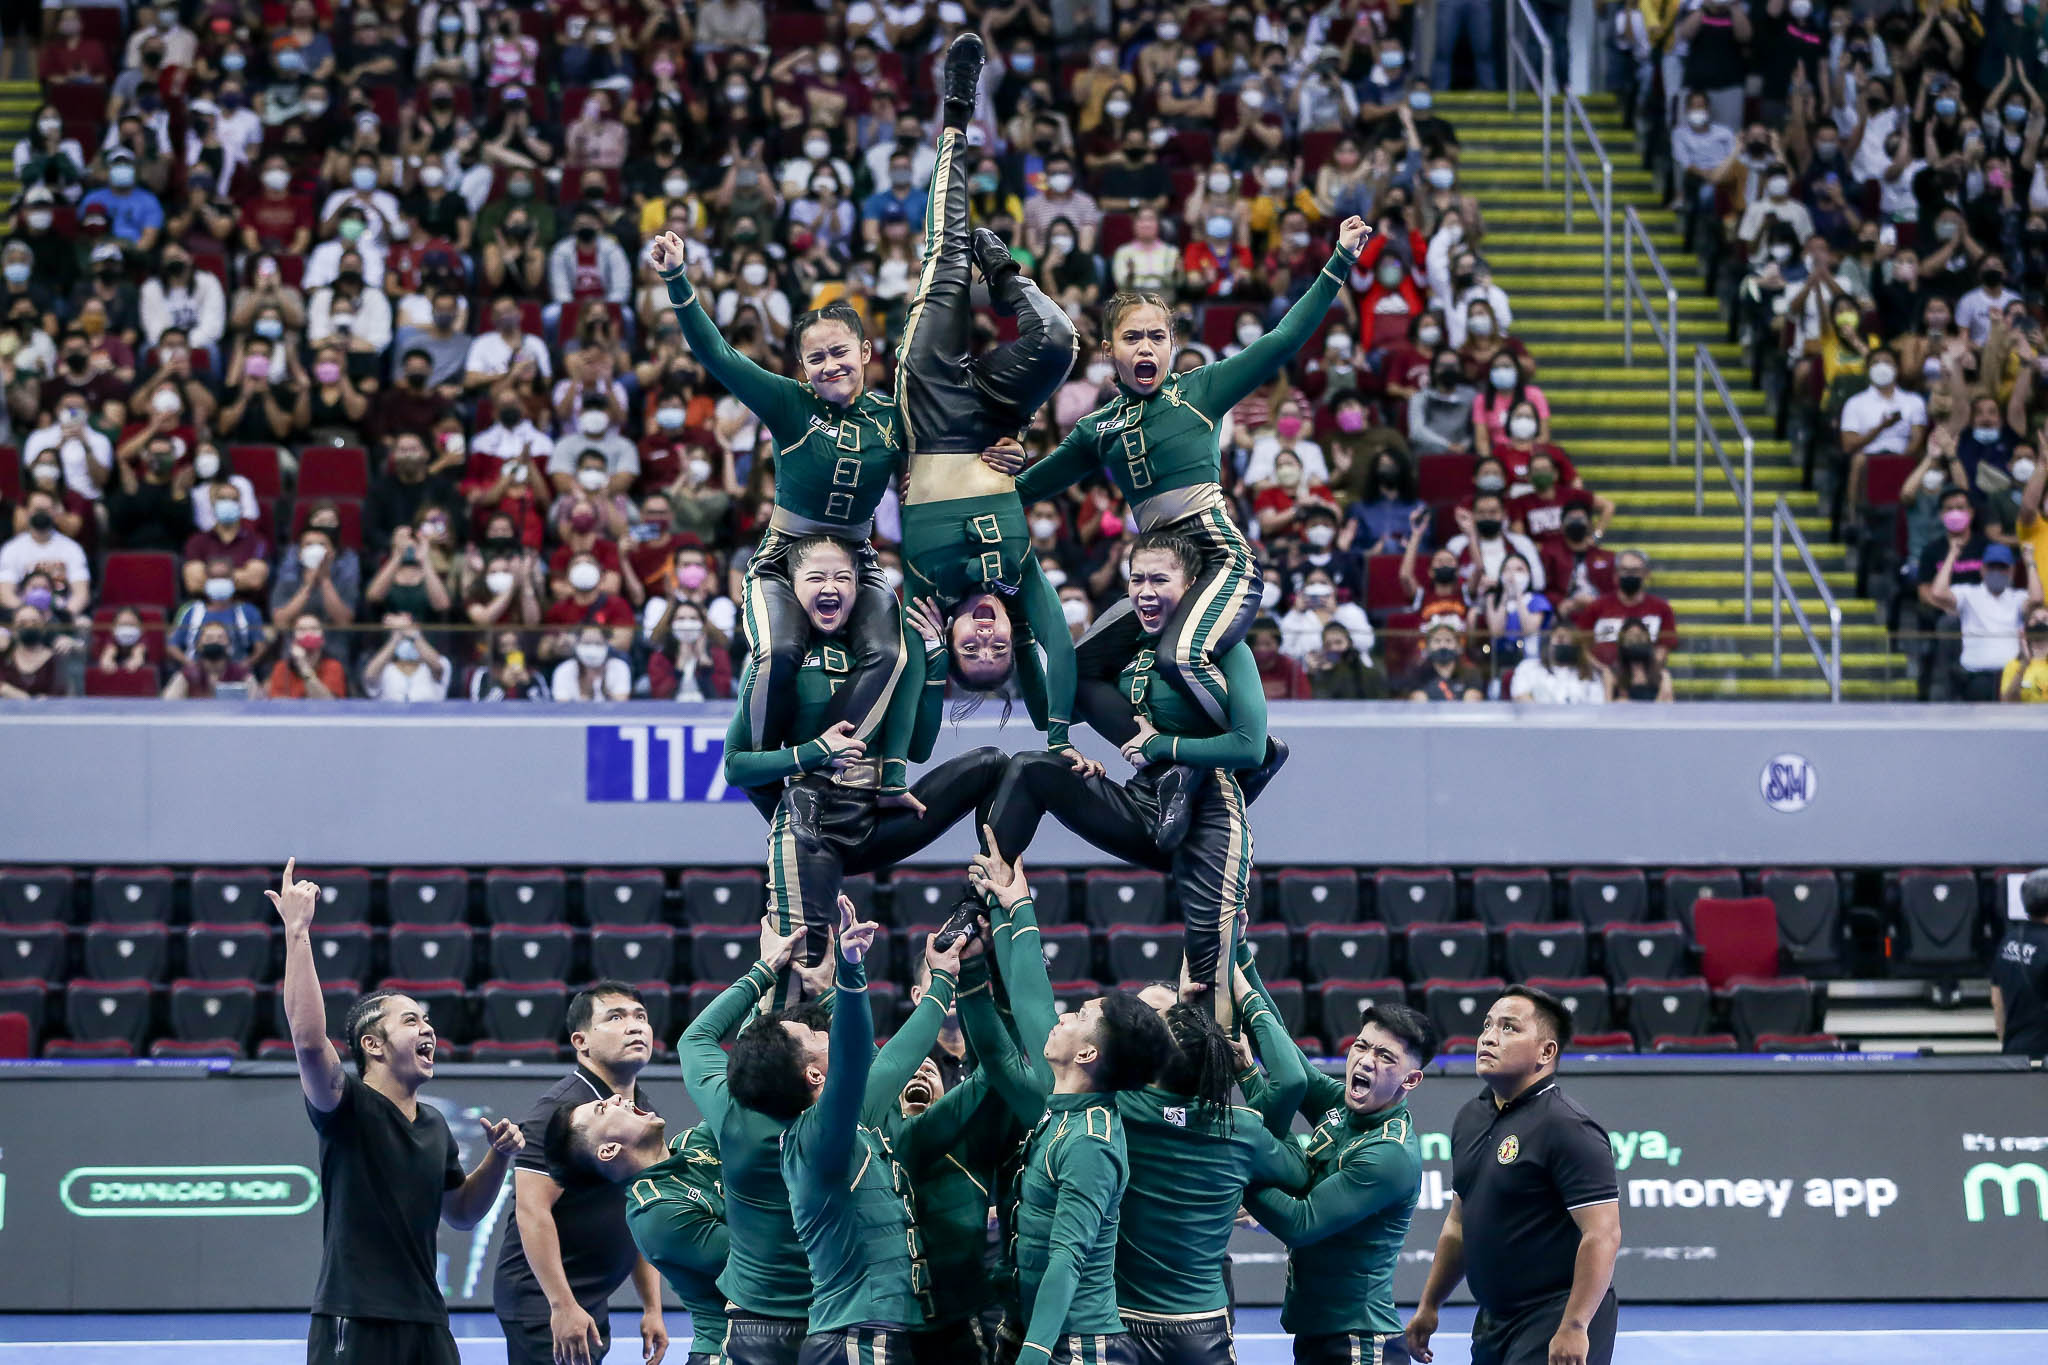 UAAP-Season-84-CDC-FEU-1-1 FEU Cheering Squad to follow up Queen tribute with a salute to 'The Man From Manila' for UAAP 85 Cheerleading FEU News UAAP  - philippine sports news